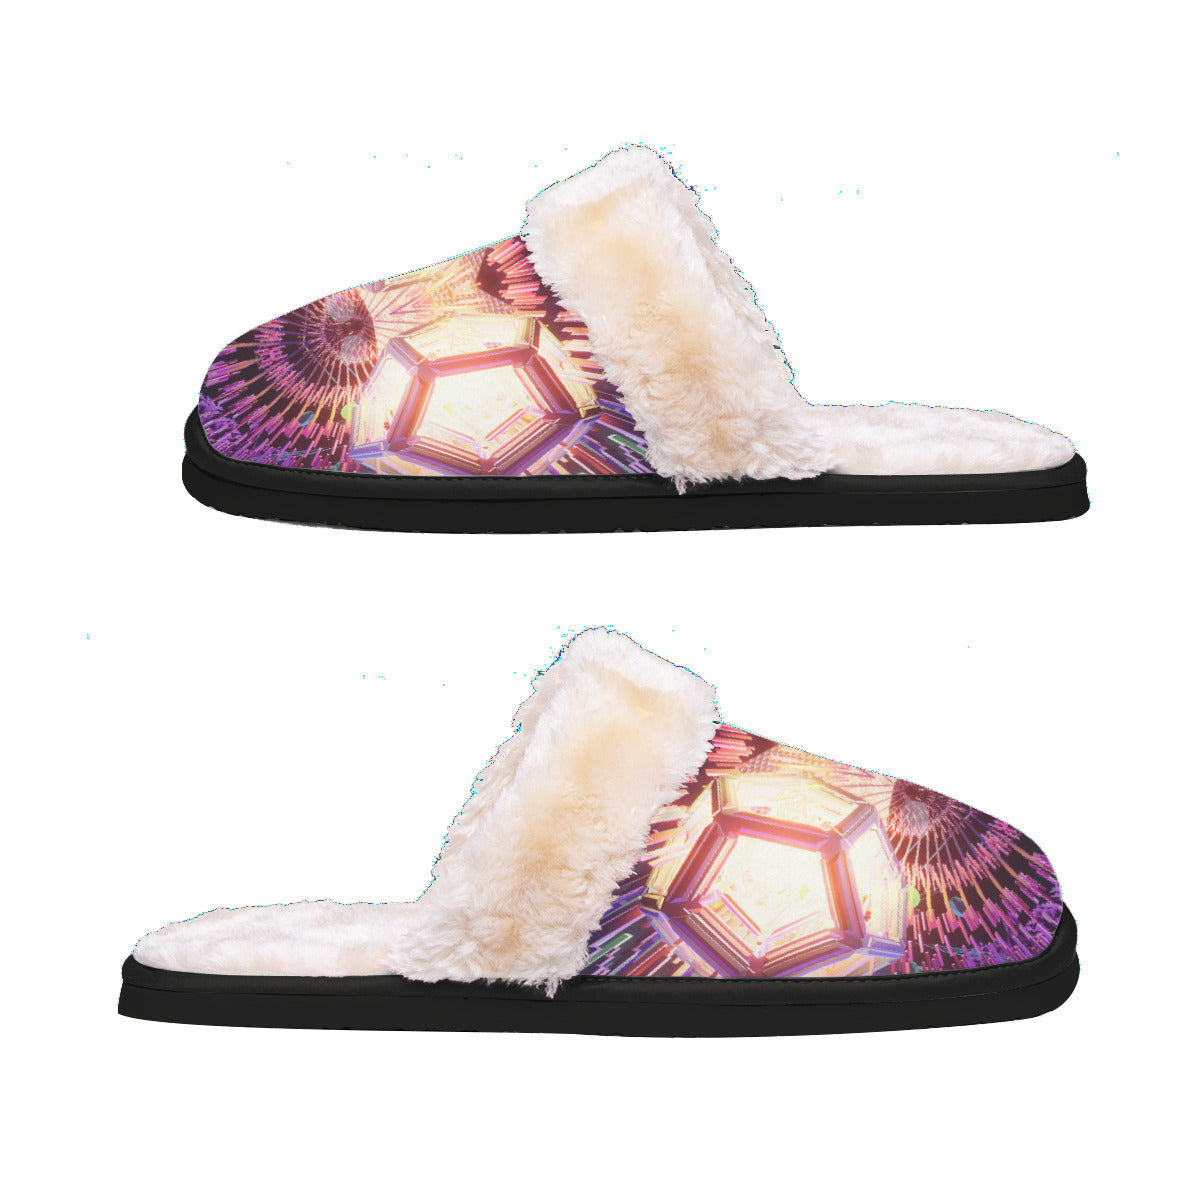 Dosedecahedron Psychedelic Plush Slippers